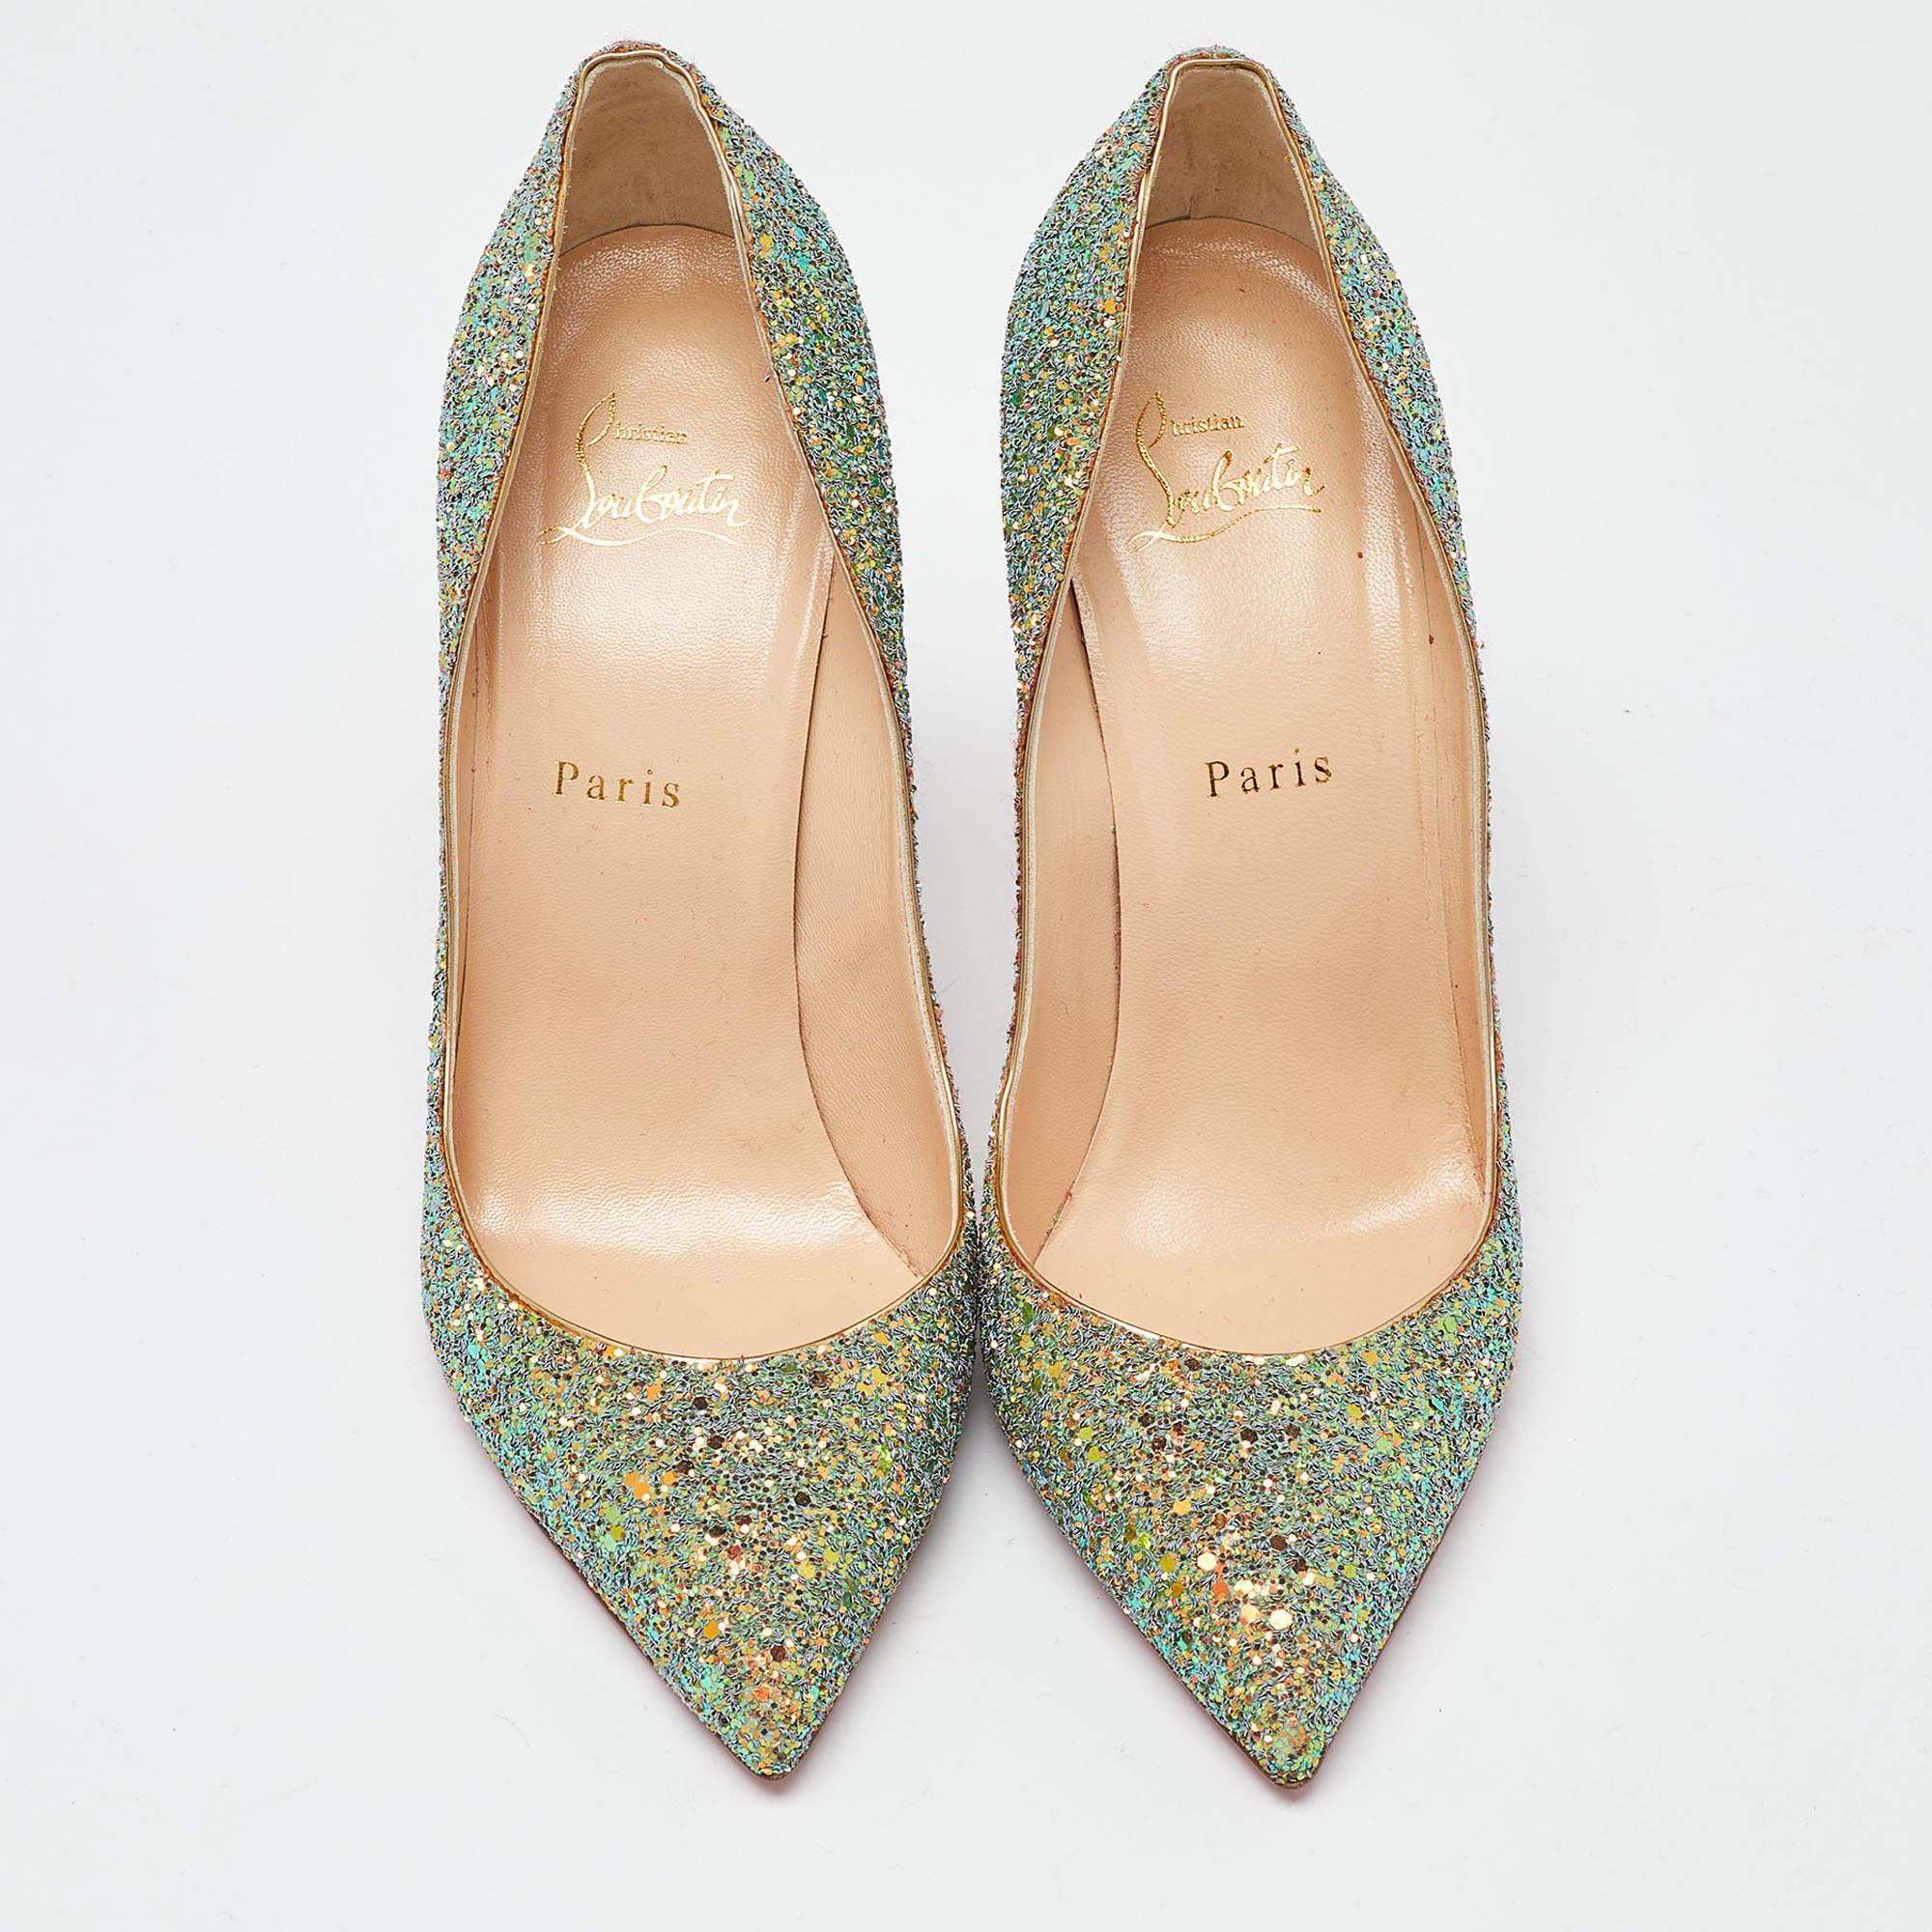 Christian Louboutin Gold/Green Glitter Pigalle Follies Pumps Size 40.5 In Good Condition For Sale In Dubai, Al Qouz 2